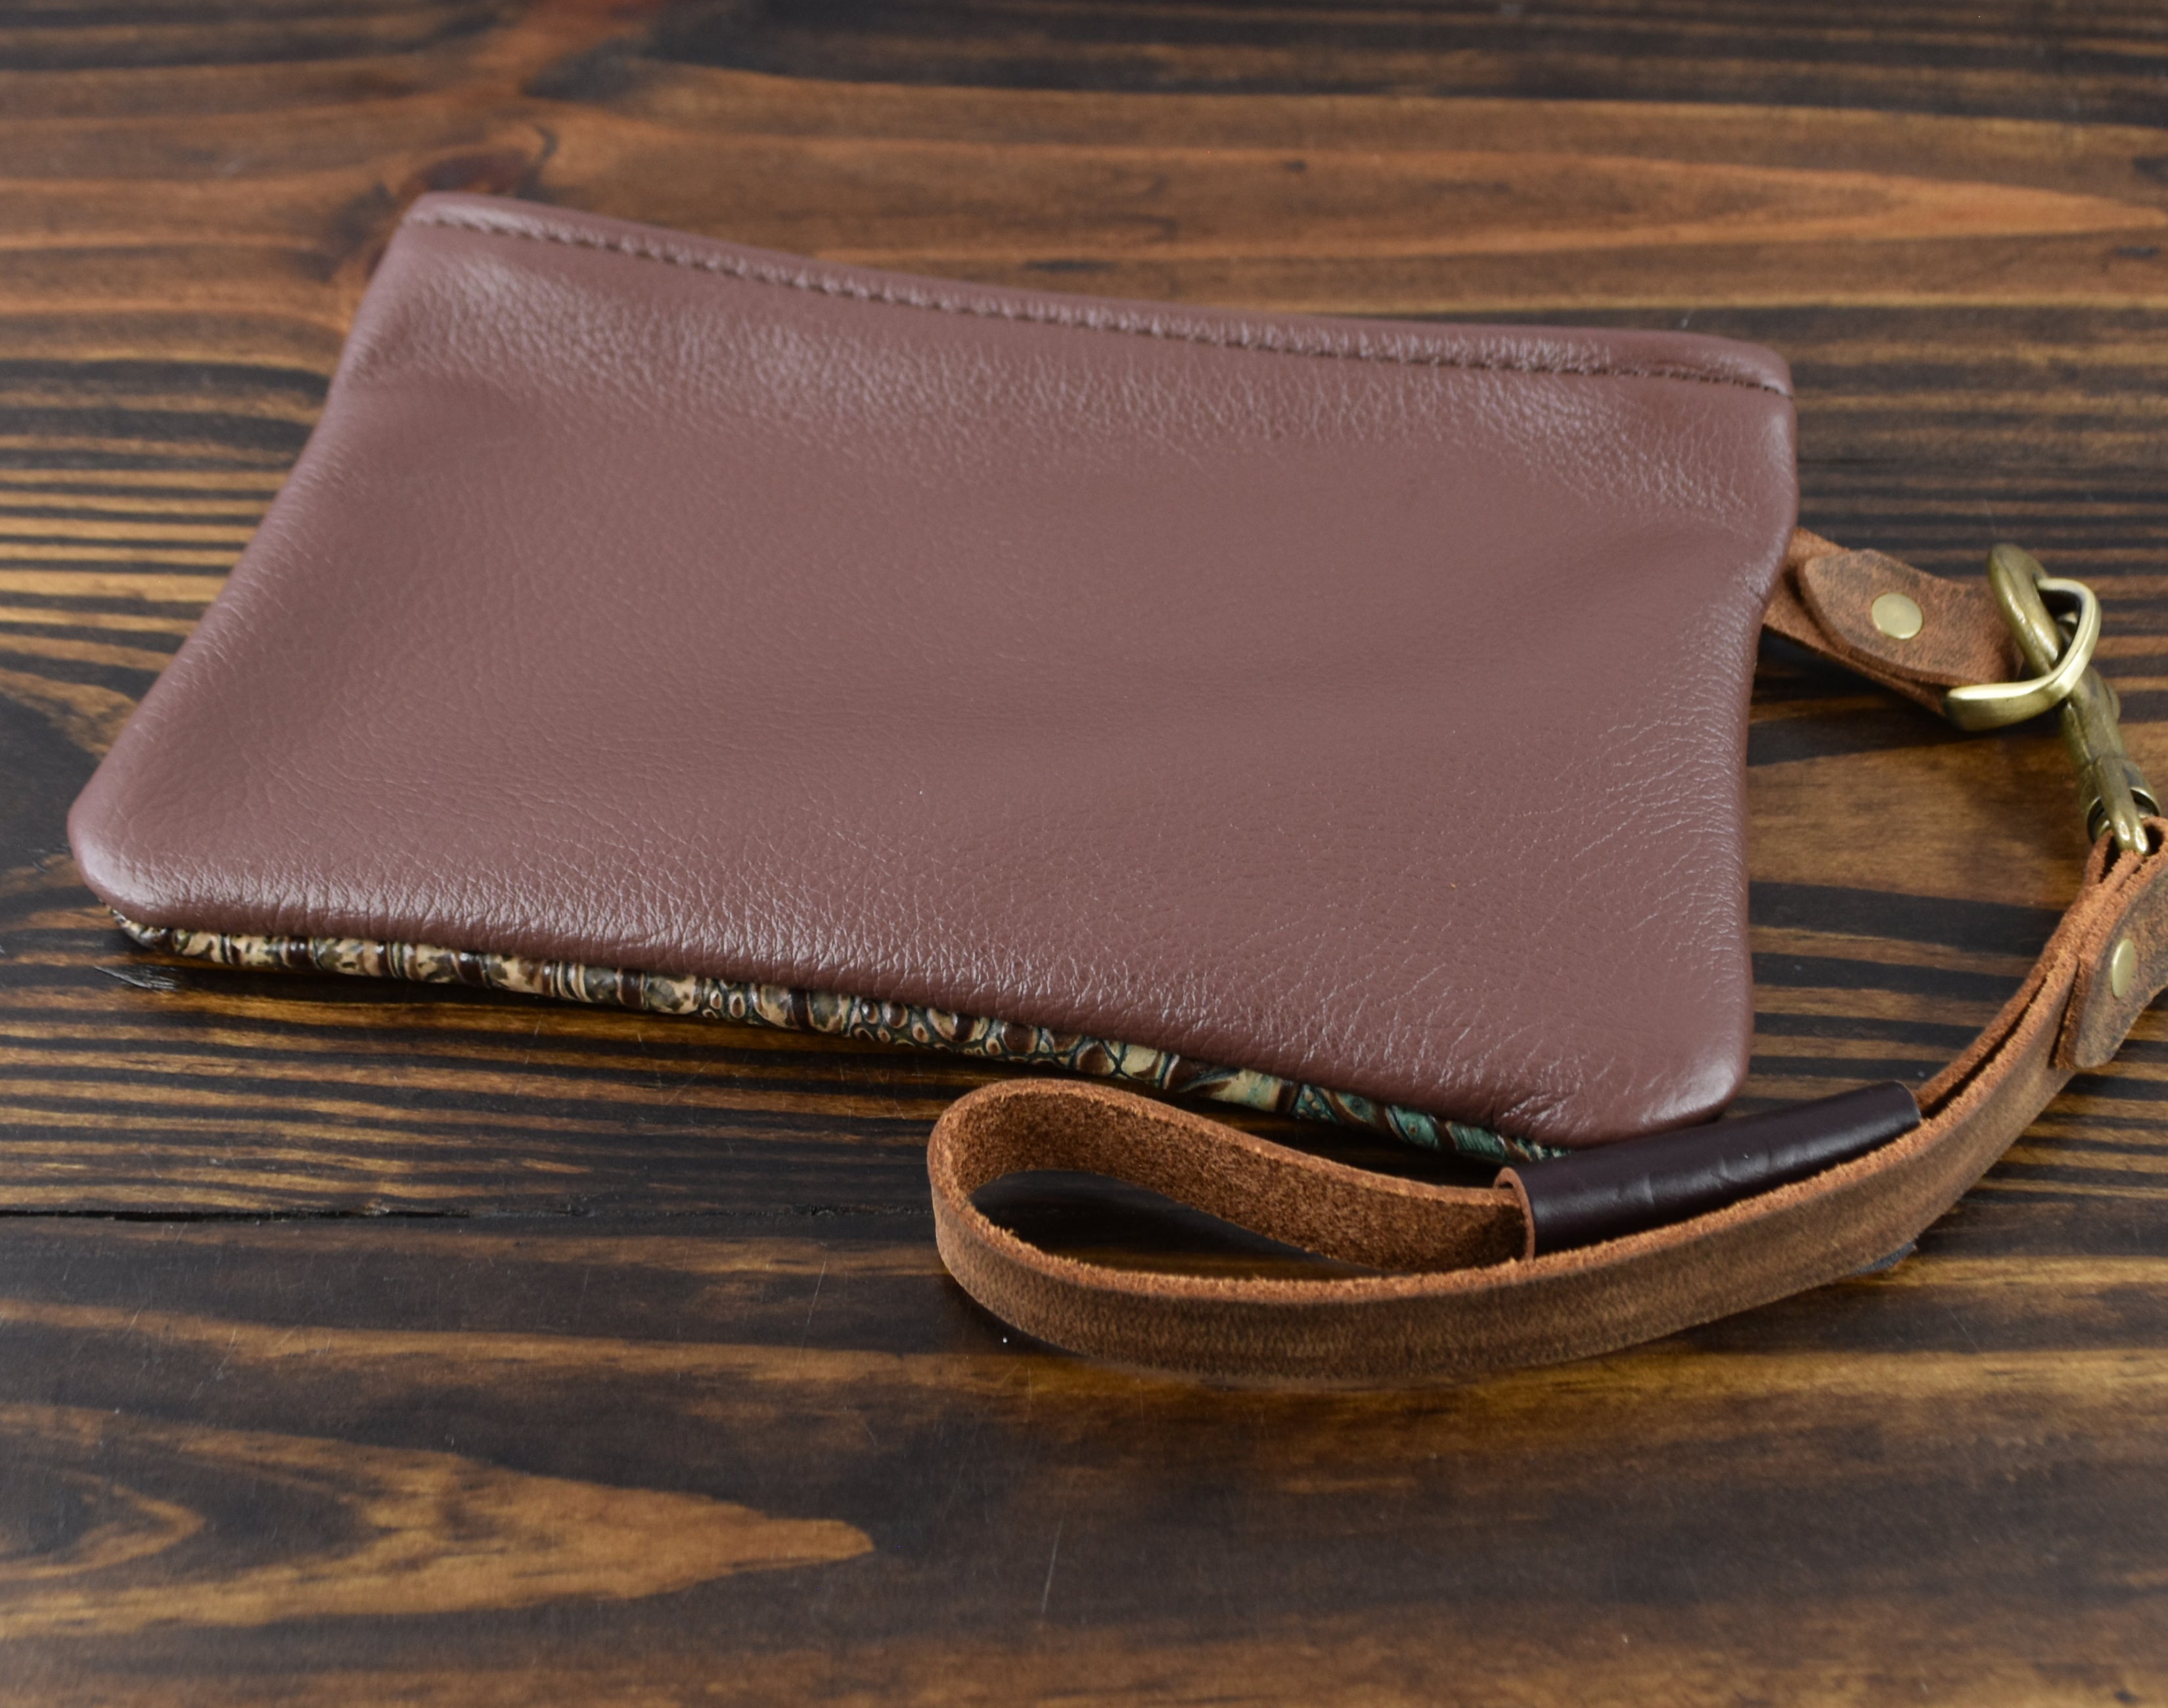 Small Leather Wristlet